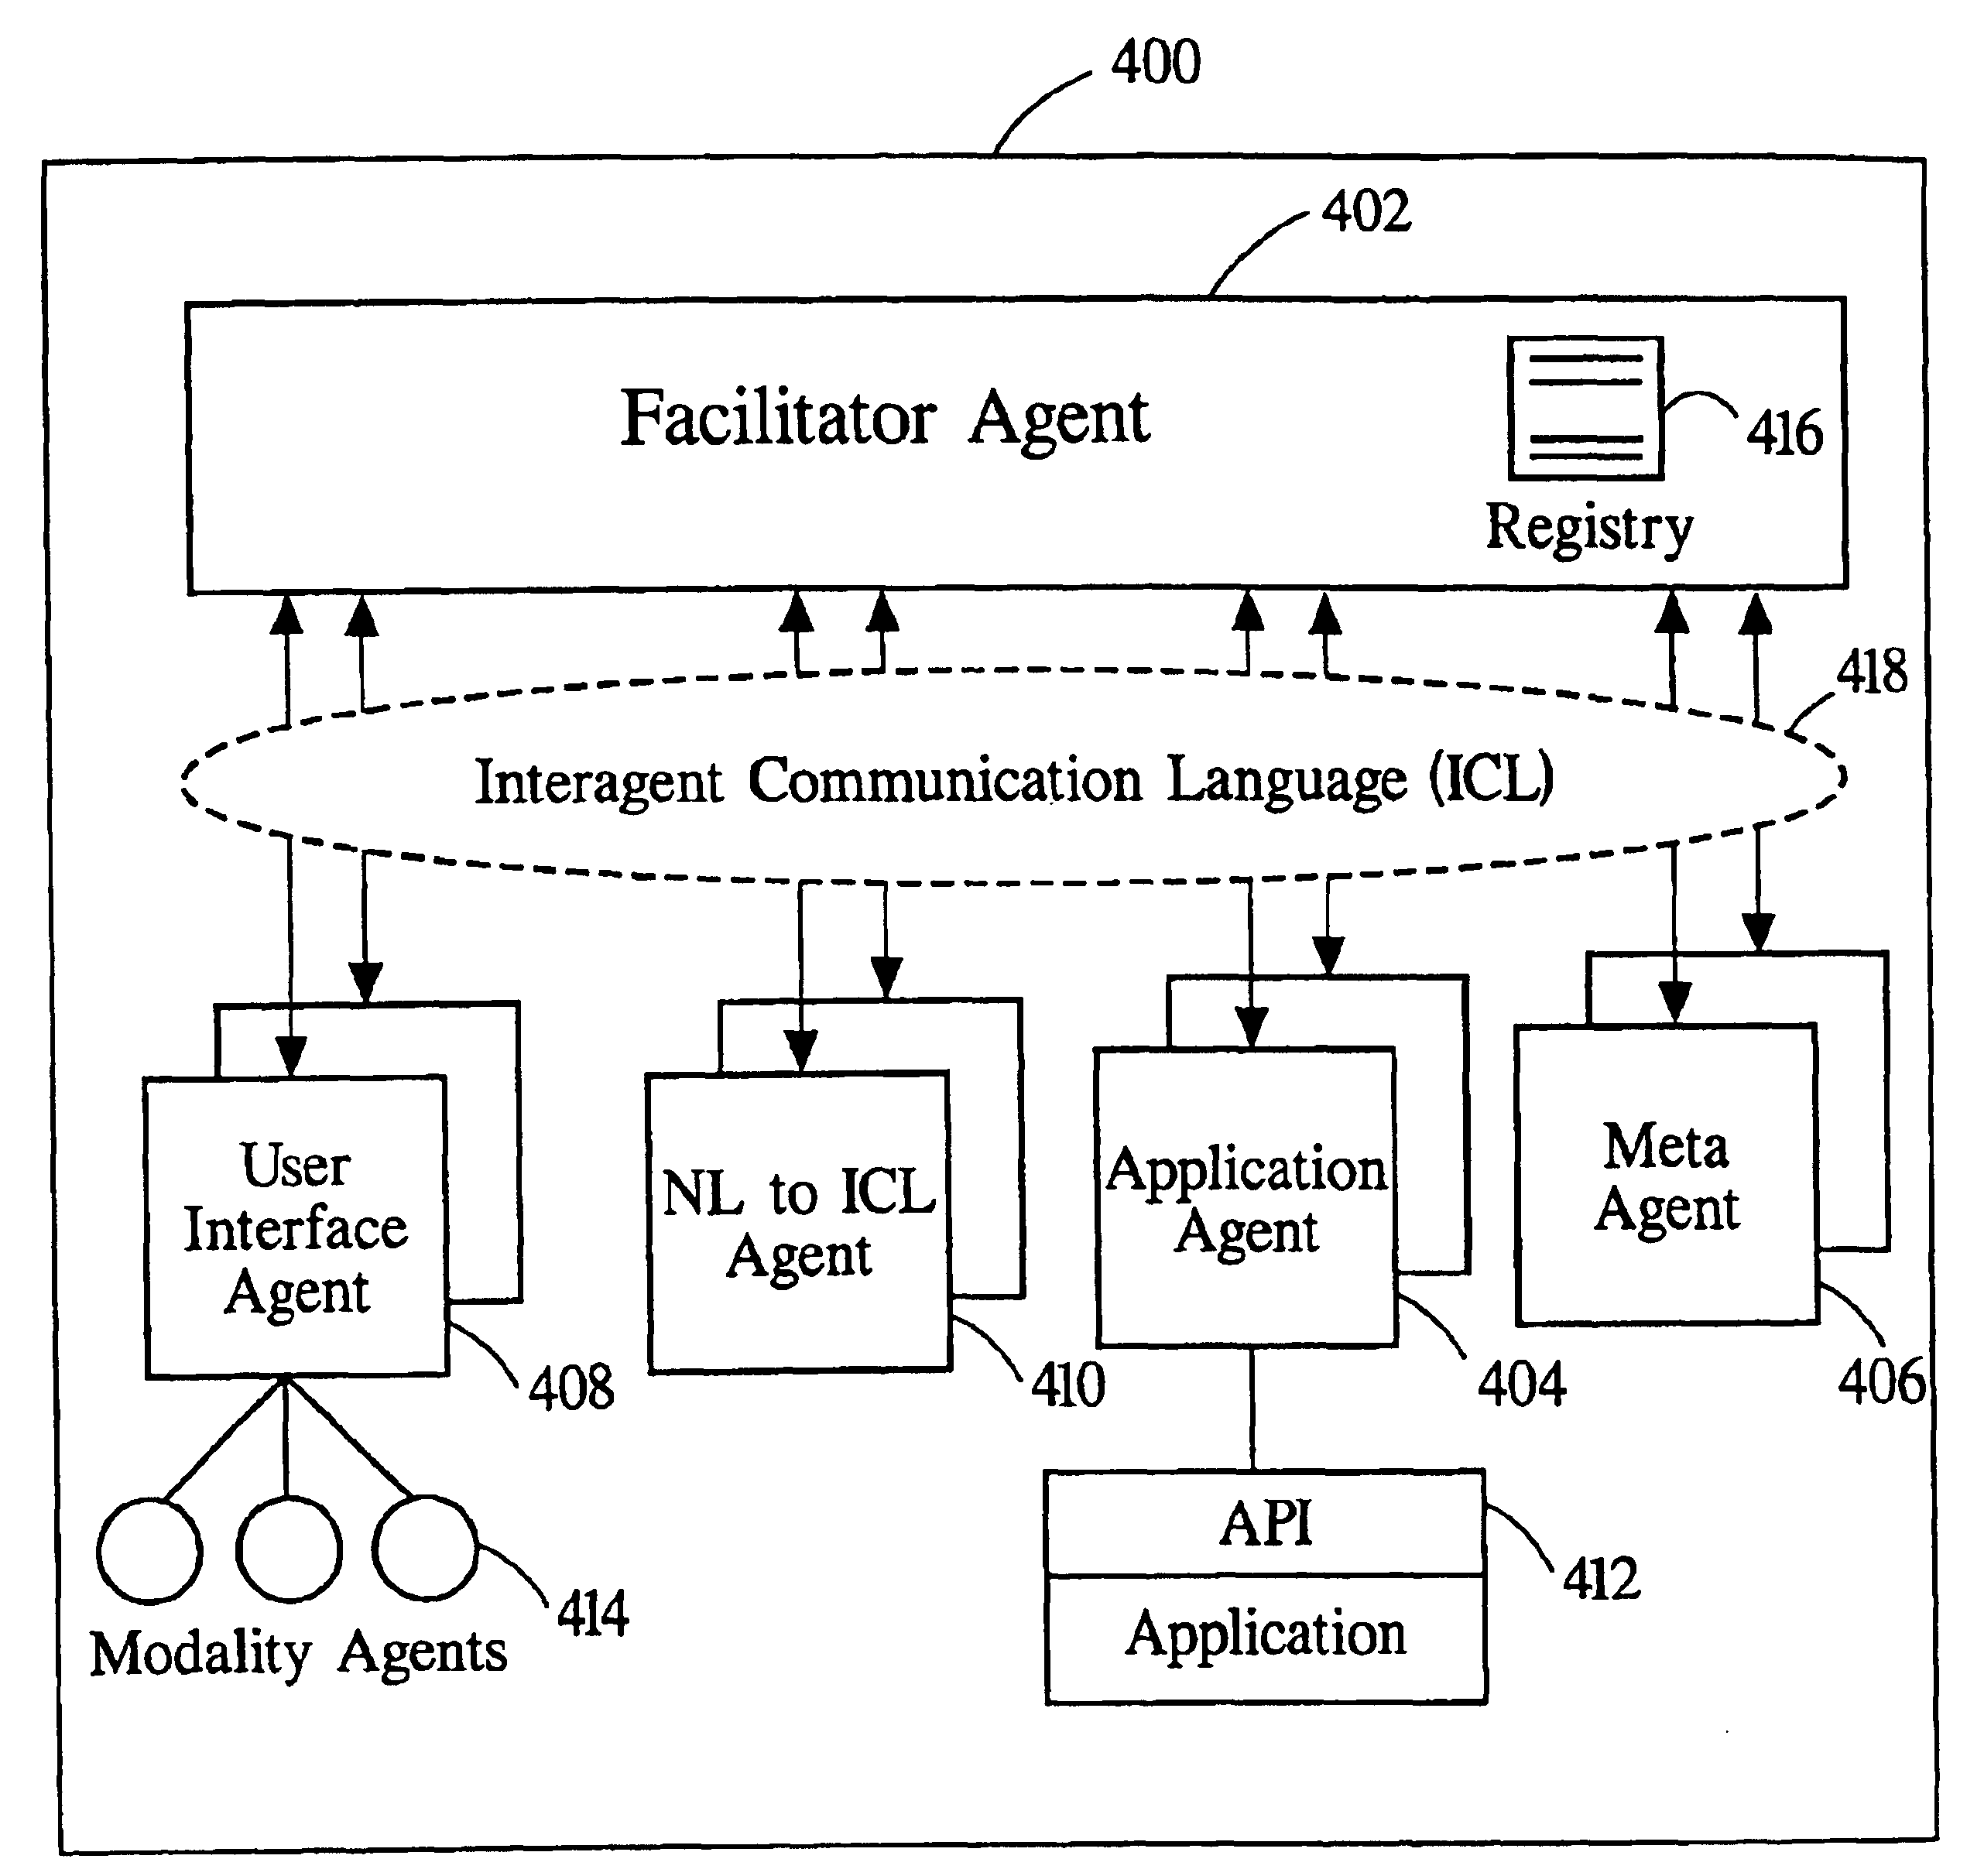 Software-based architecture for communication and cooperation among distributed electronic agents